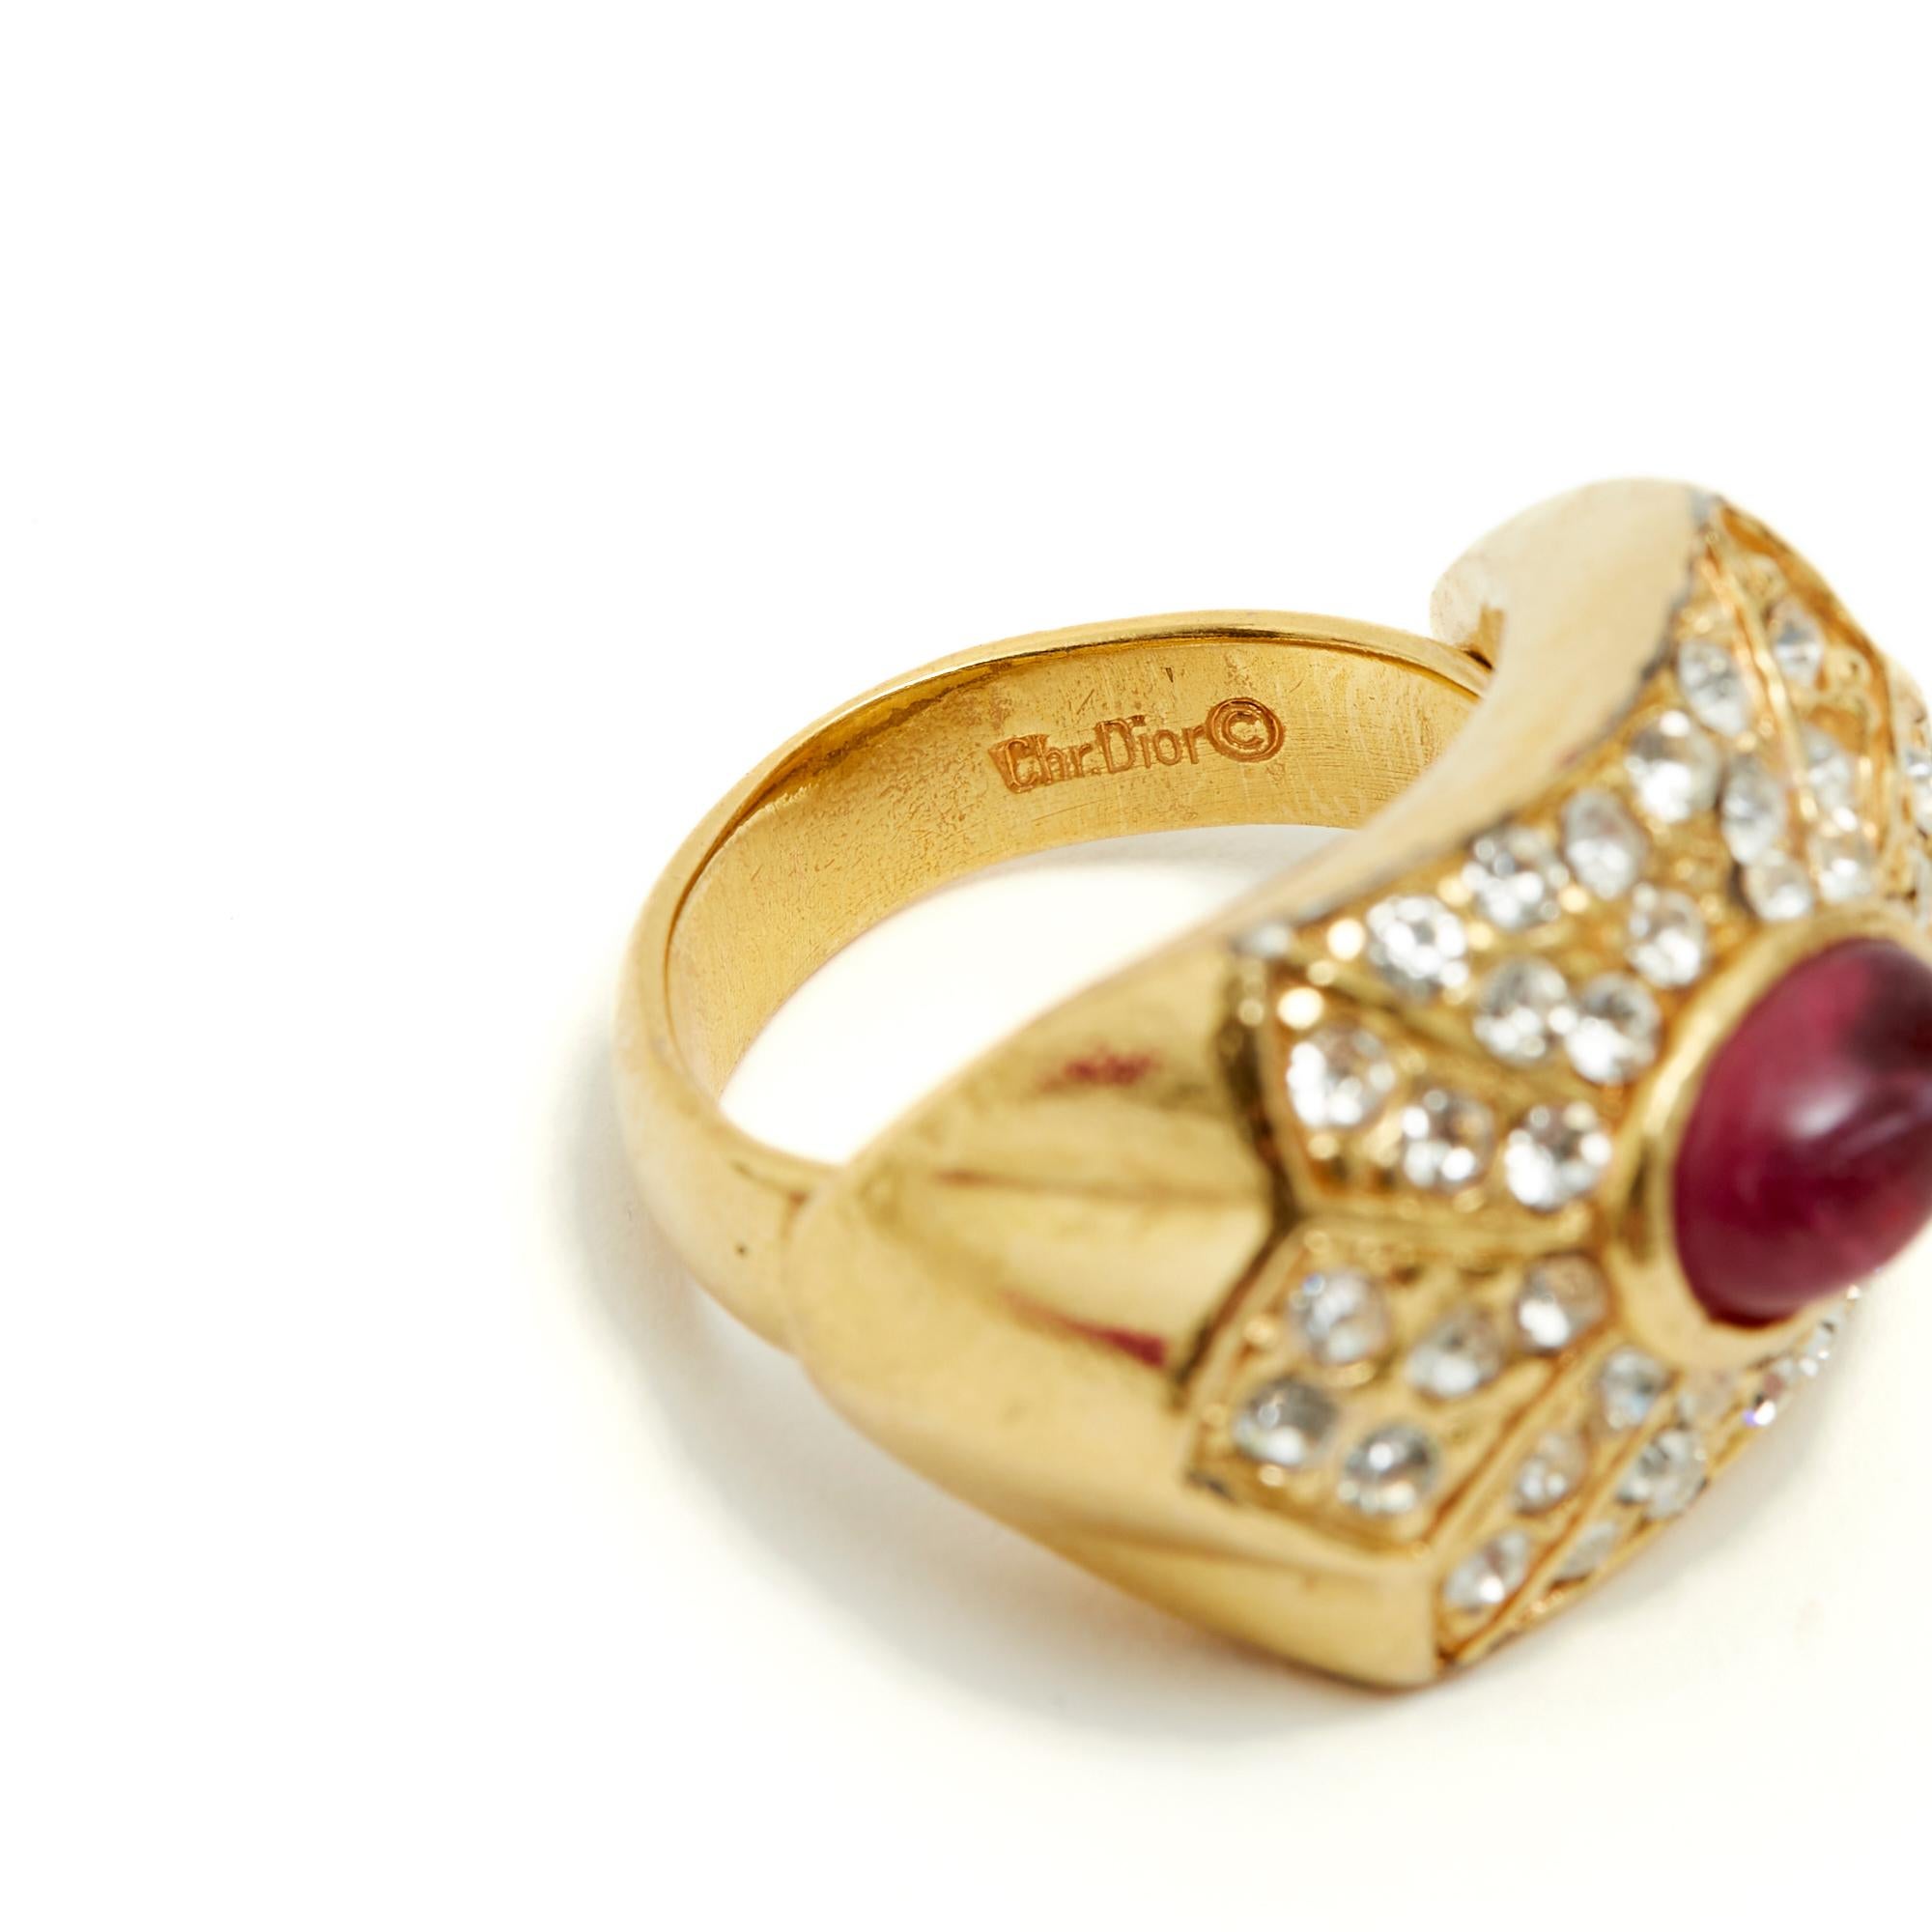 Christian Dior Vintage Fancy Ruby Diamonds Ring T49 US4.75 1